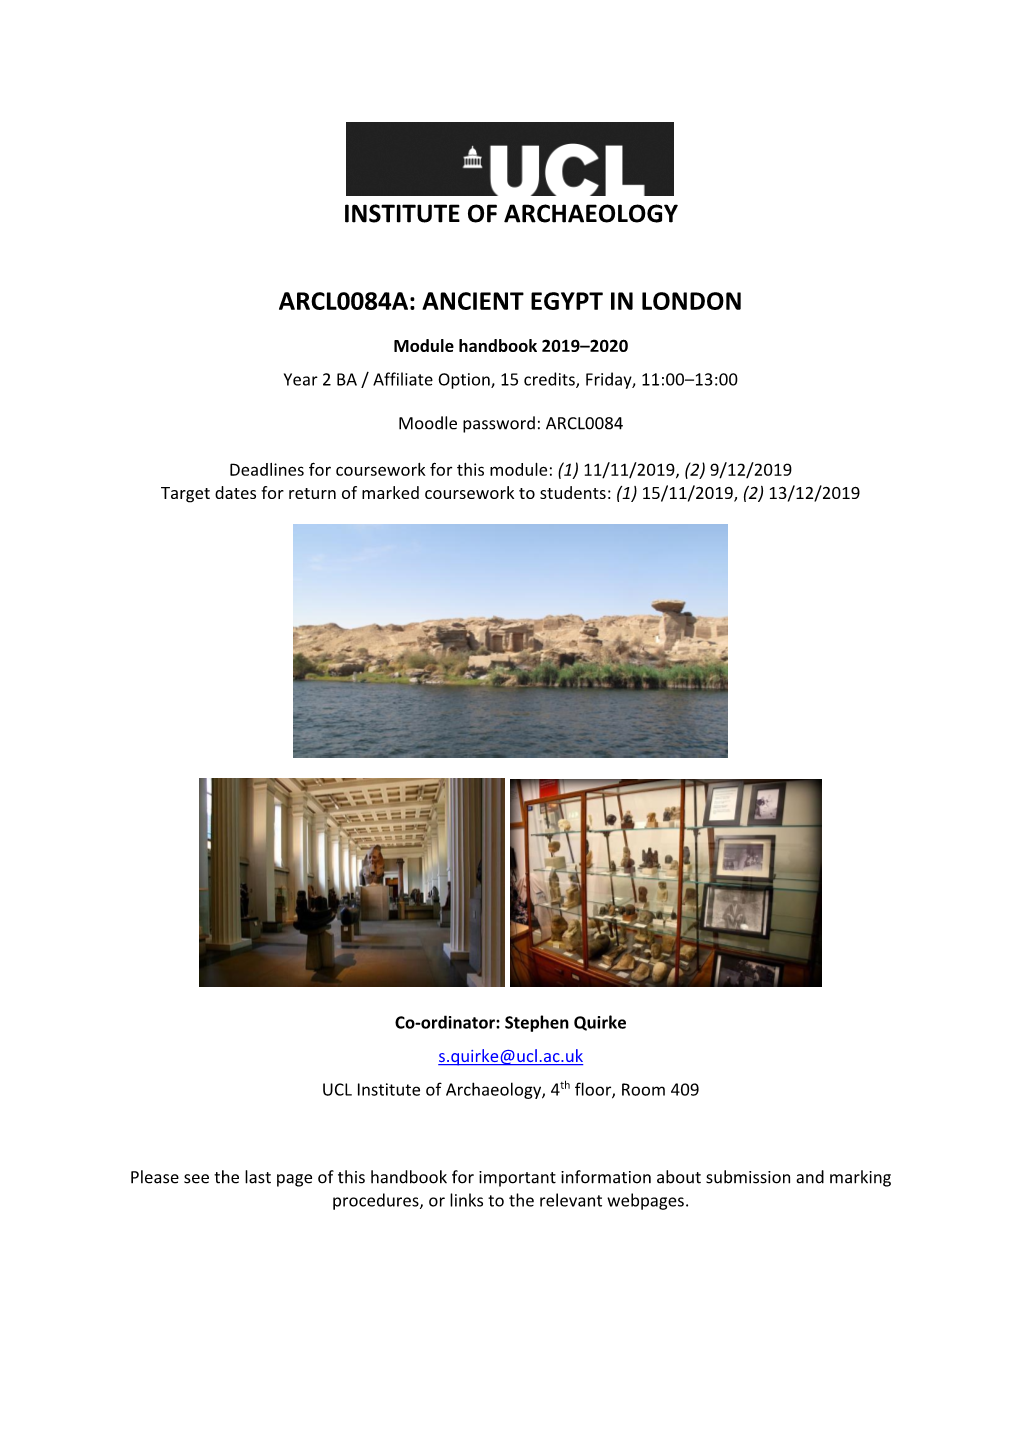 Institute of Archaeology Arcl0084a: Ancient Egypt in London